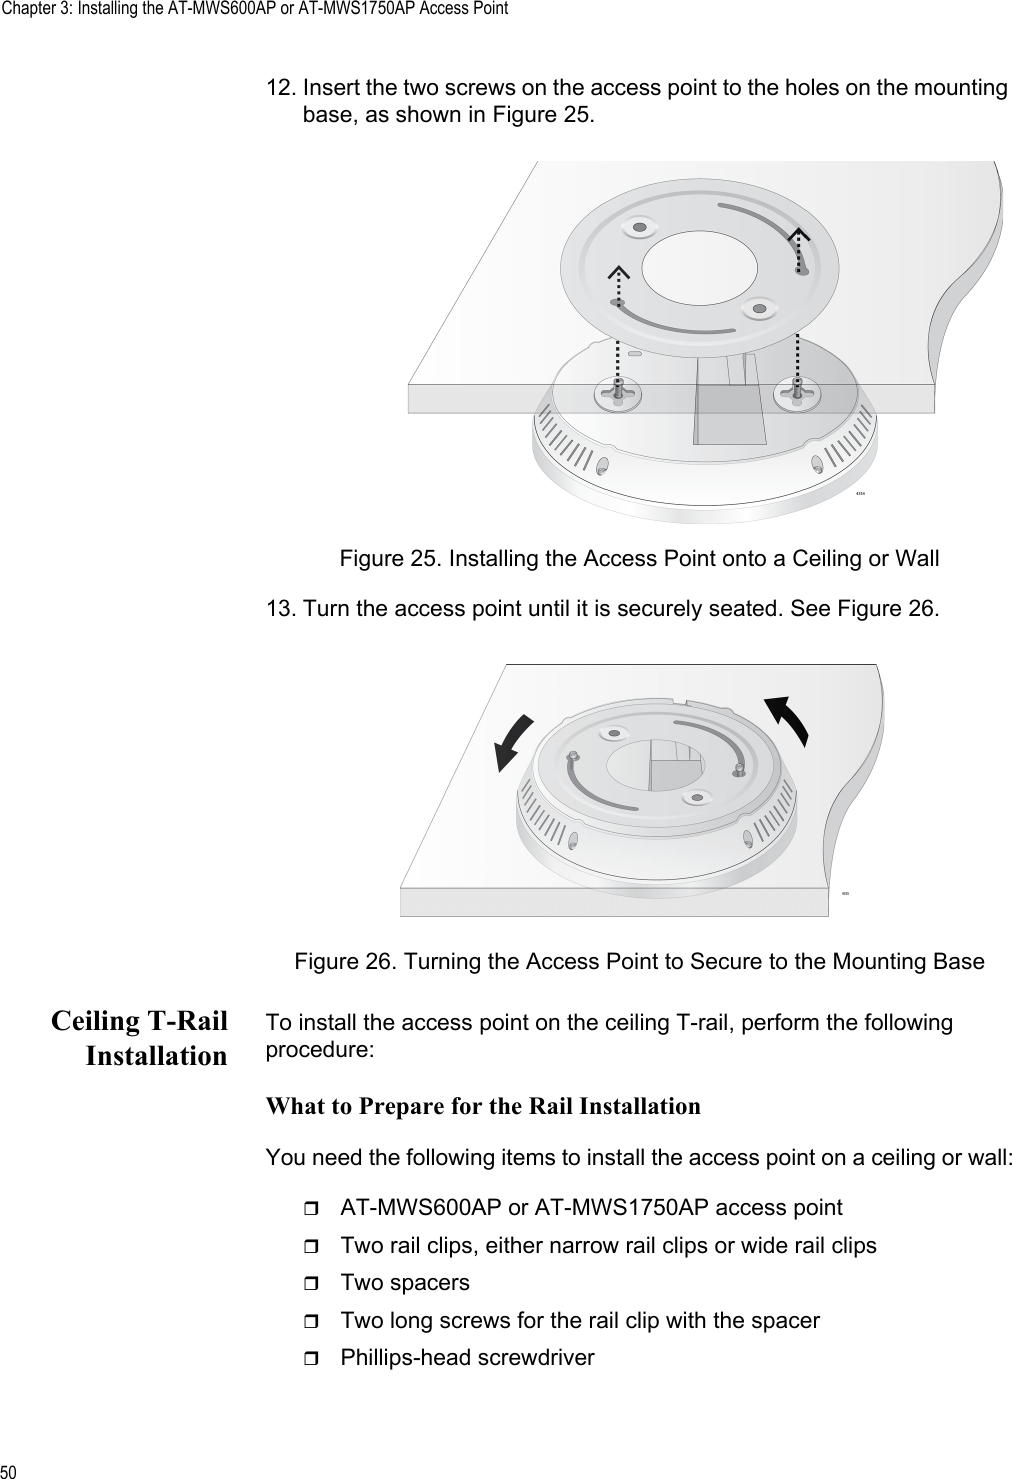 Chapter 3: Installing the AT-MWS600AP or AT-MWS1750AP Access Point5012. Insert the two screws on the access point to the holes on the mounting base, as shown in Figure 25.Figure 25. Installing the Access Point onto a Ceiling or Wall13. Turn the access point until it is securely seated. See Figure 26.Figure 26. Turning the Access Point to Secure to the Mounting BaseCeiling T-RailInstallationTo install the access point on the ceiling T-rail, perform the following procedure:What to Prepare for the Rail InstallationYou need the following items to install the access point on a ceiling or wall:AT-MWS600AP or AT-MWS1750AP access pointTwo rail clips, either narrow rail clips or wide rail clipsTwo spacersTwo long screws for the rail clip with the spacerPhillips-head screwdriver